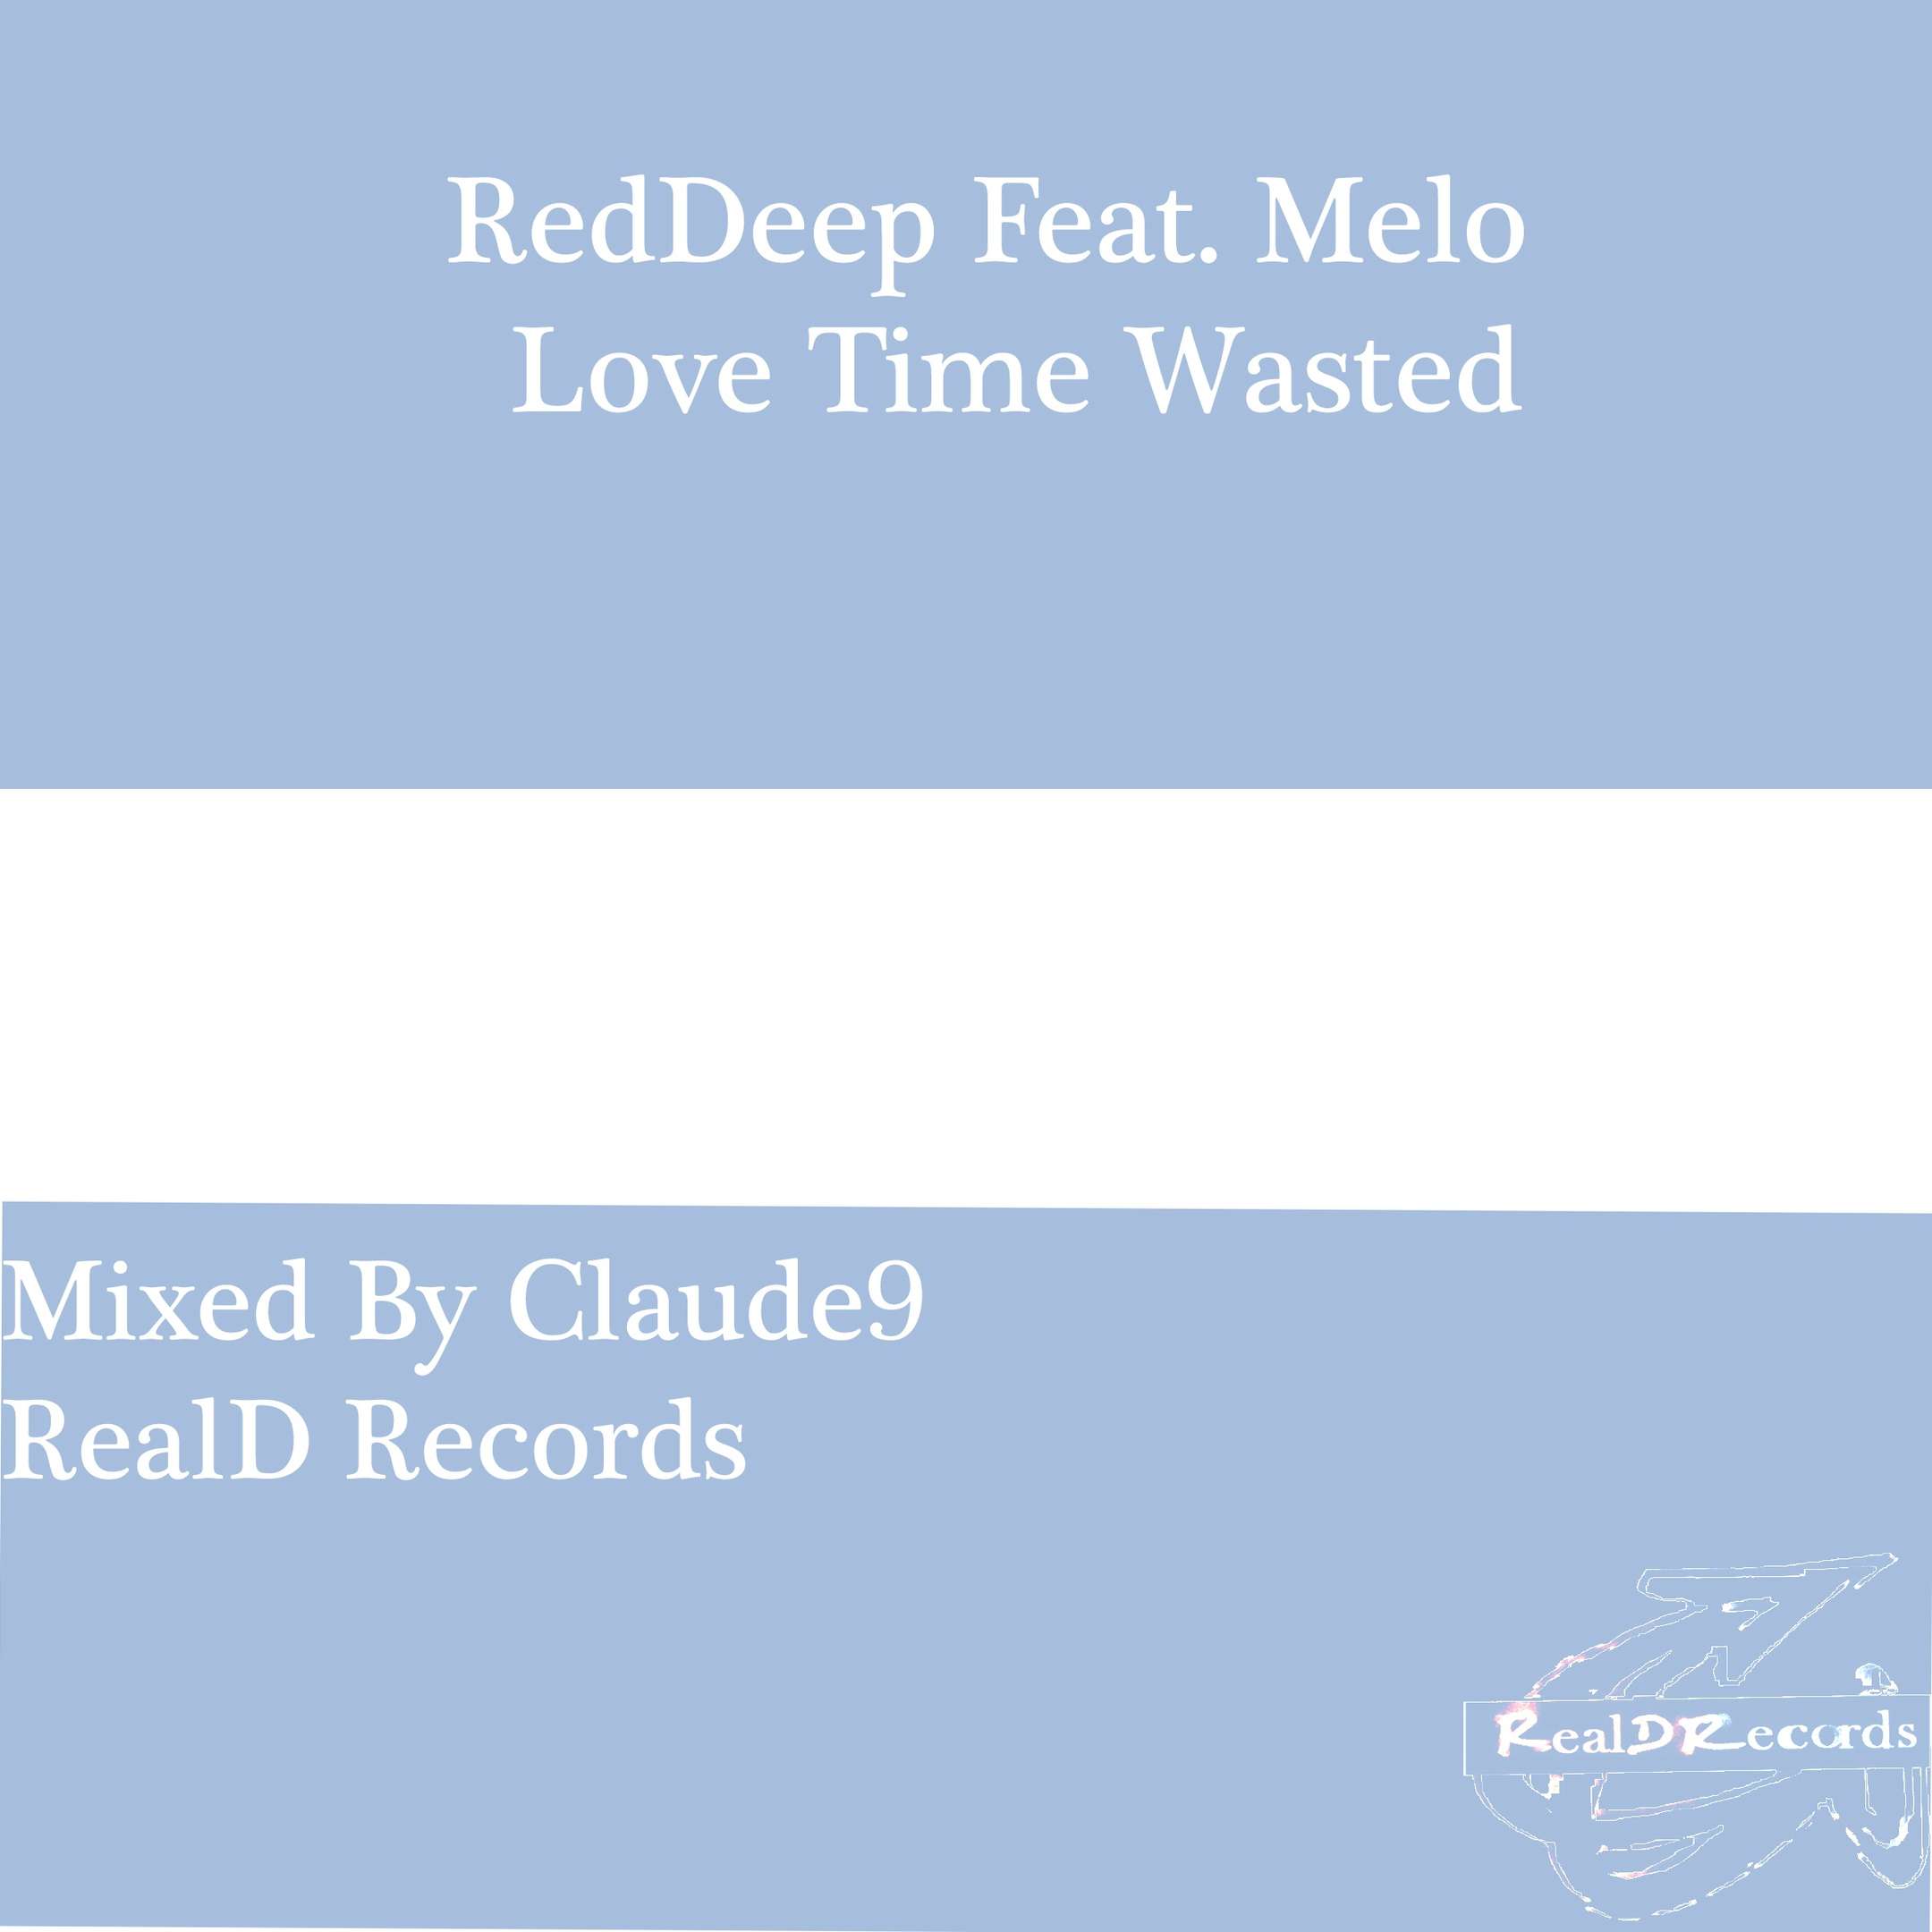 Reddeep Ft Melo - Love Time Wasted